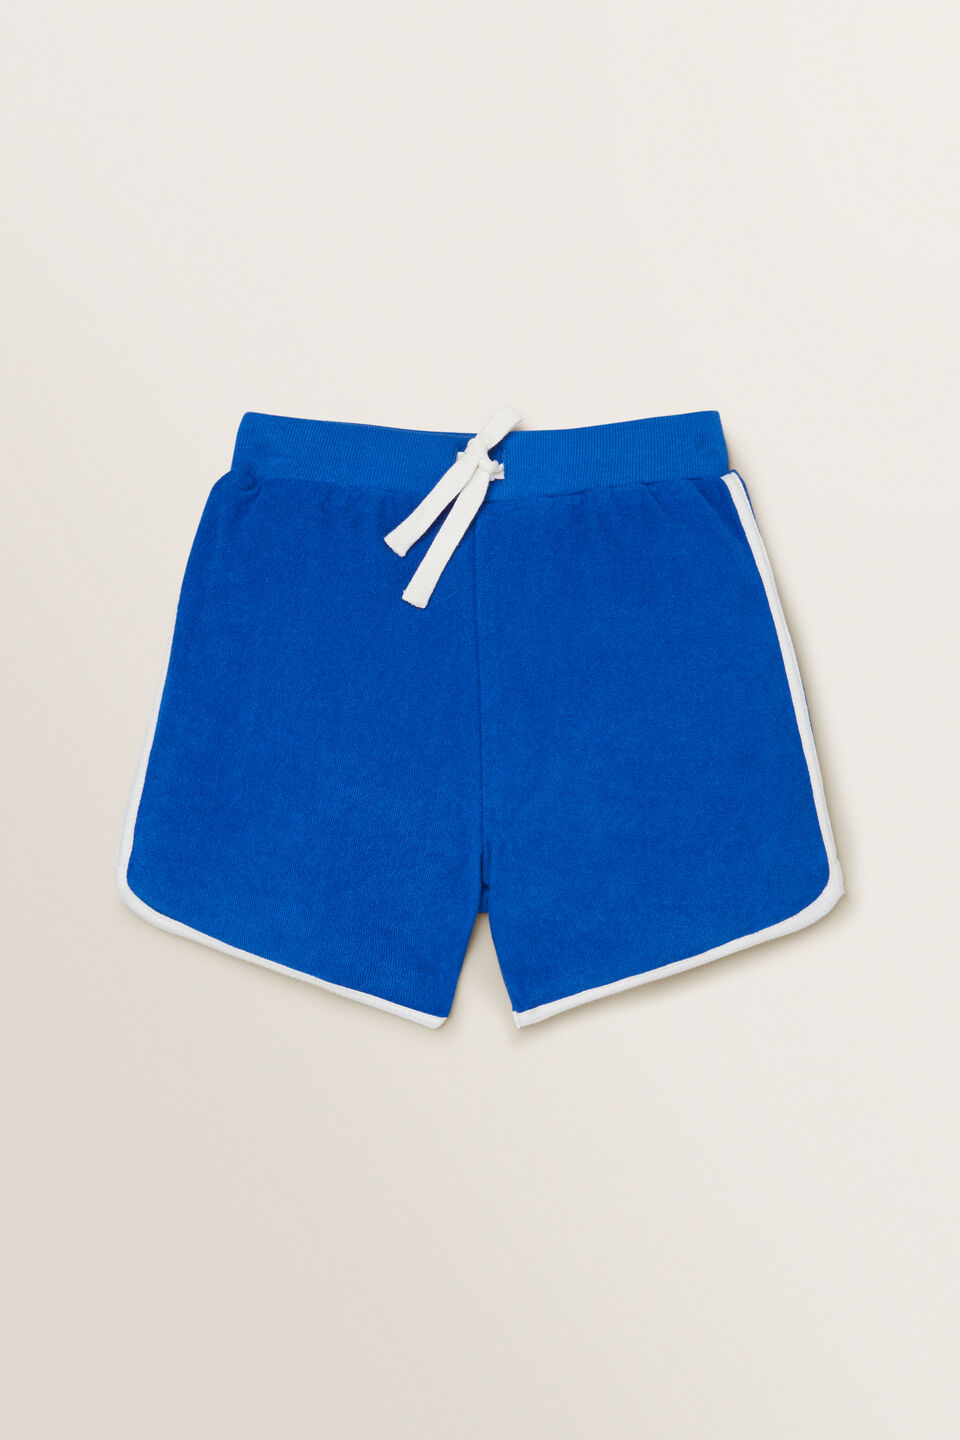 Terry Toweling Shorts  